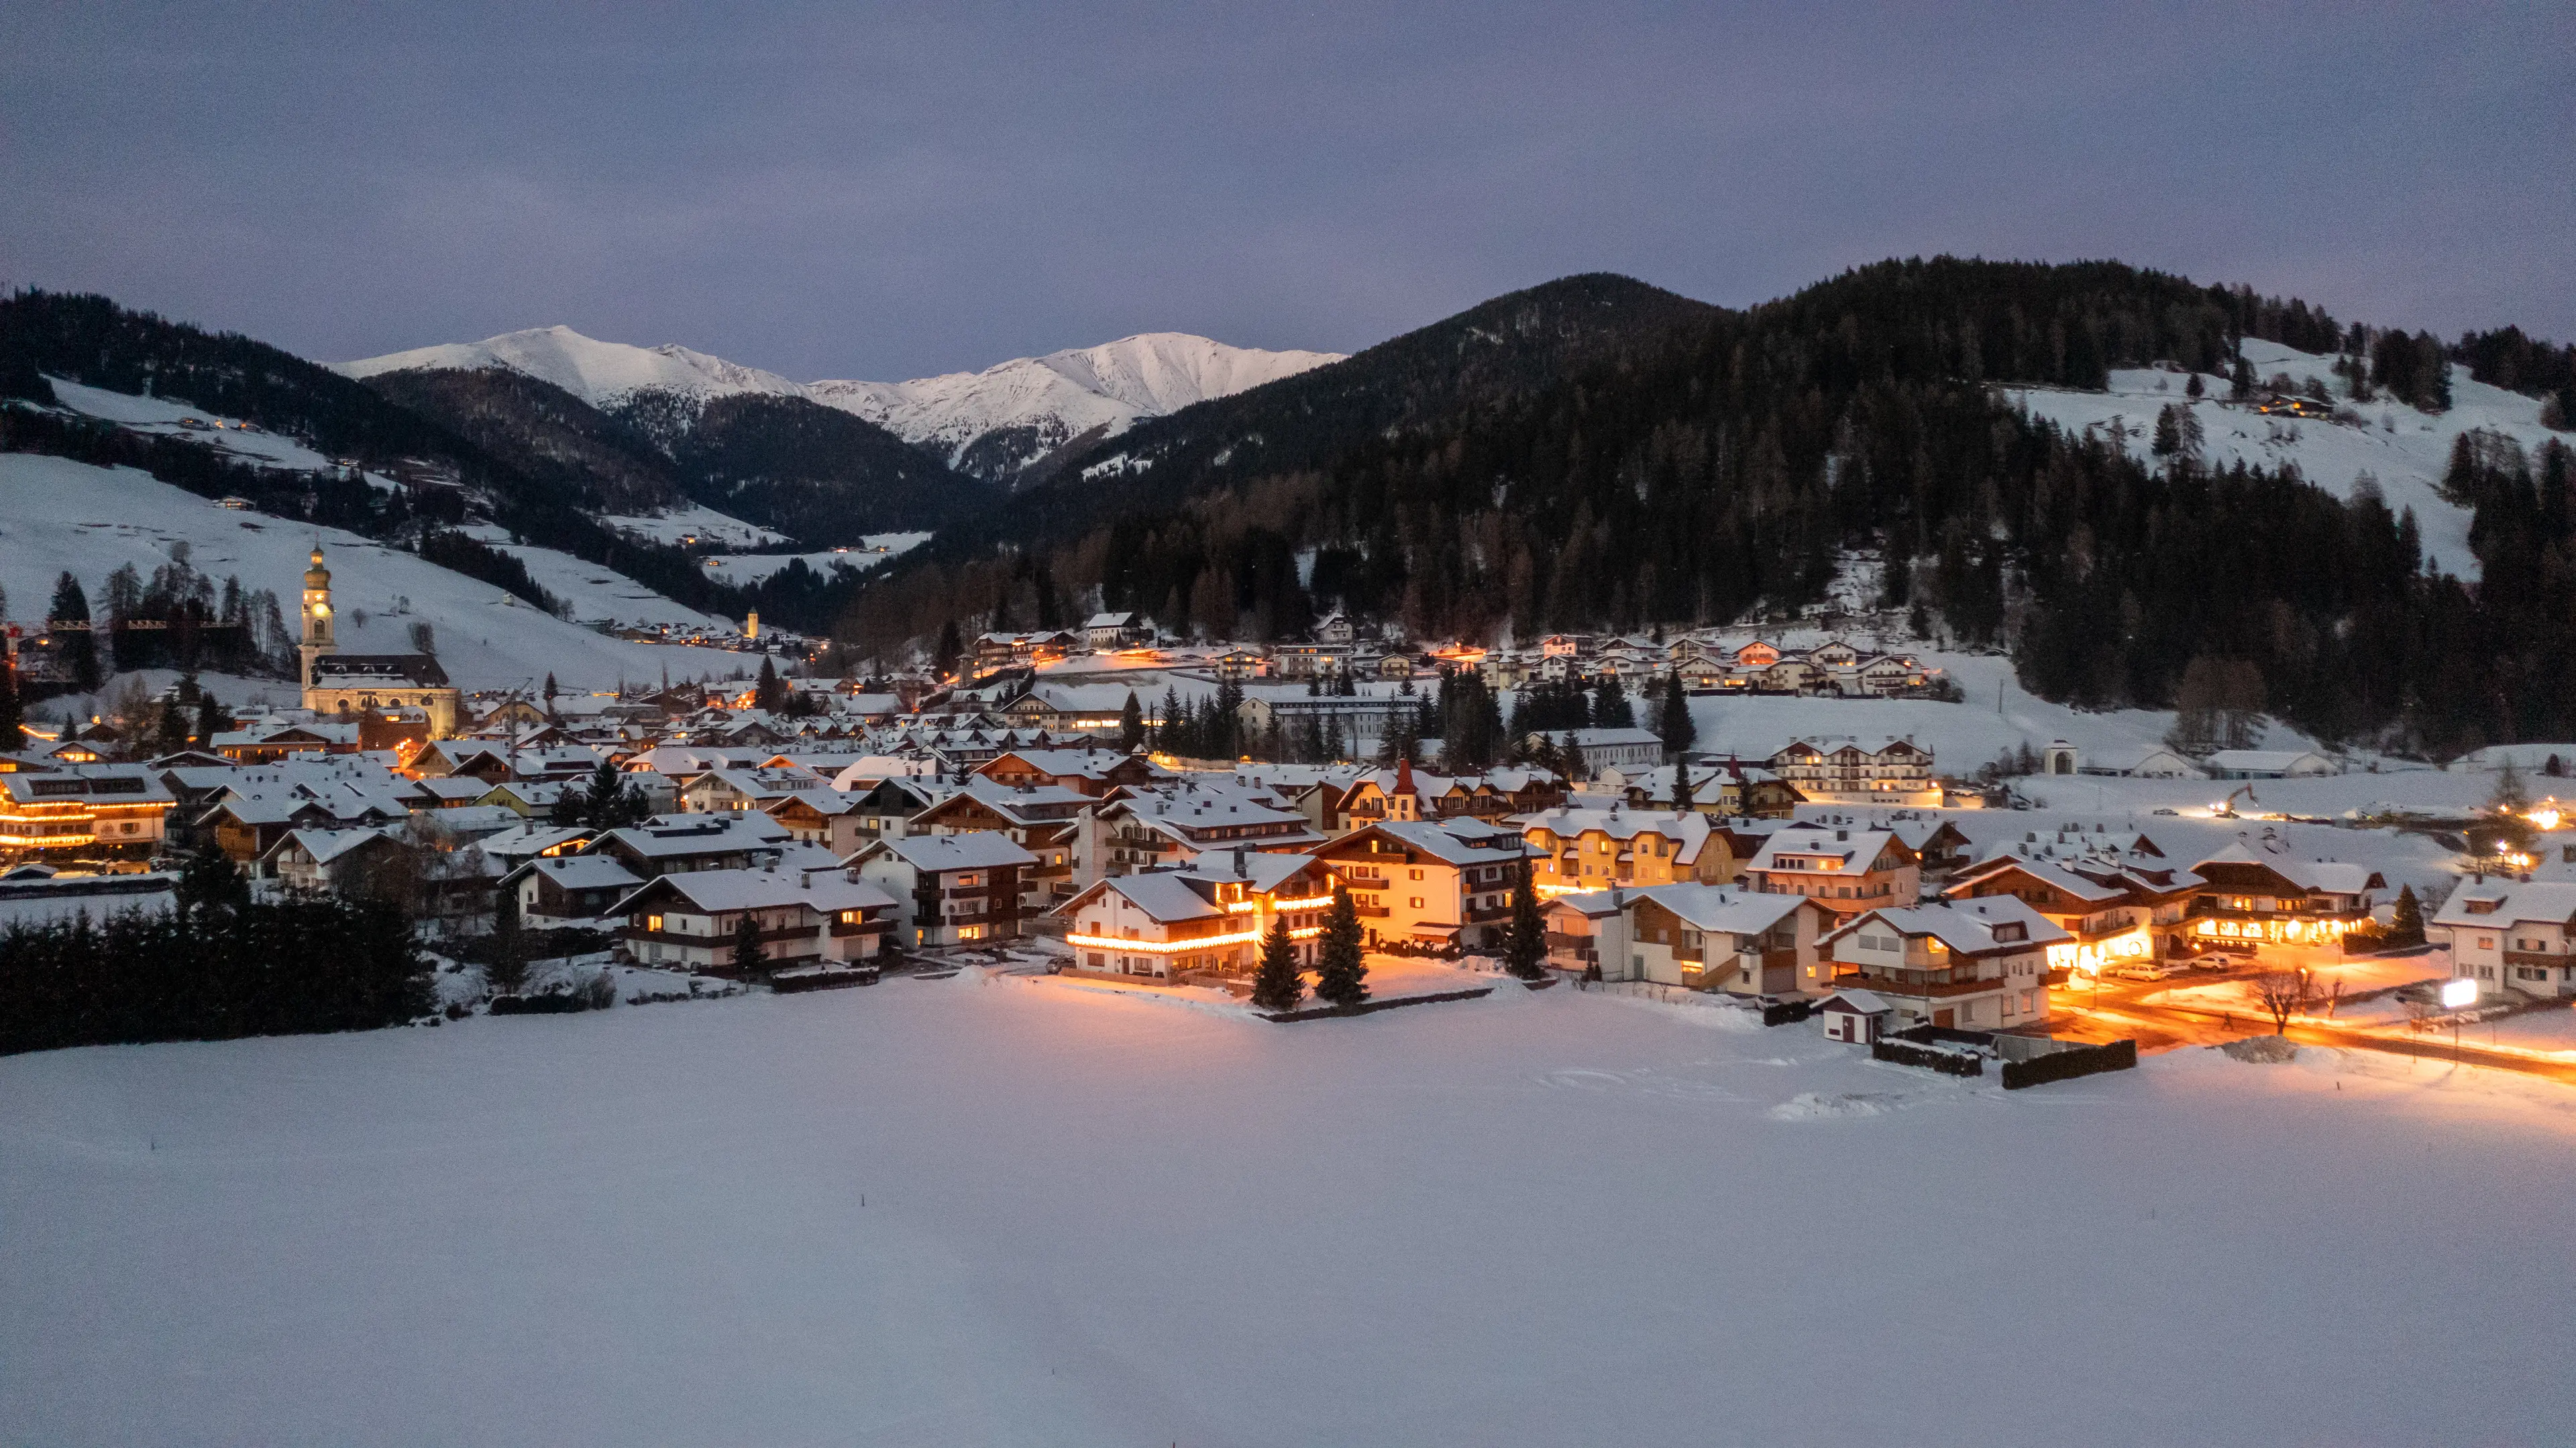 Aerial view of beautiful alpin mountain town at christmas time